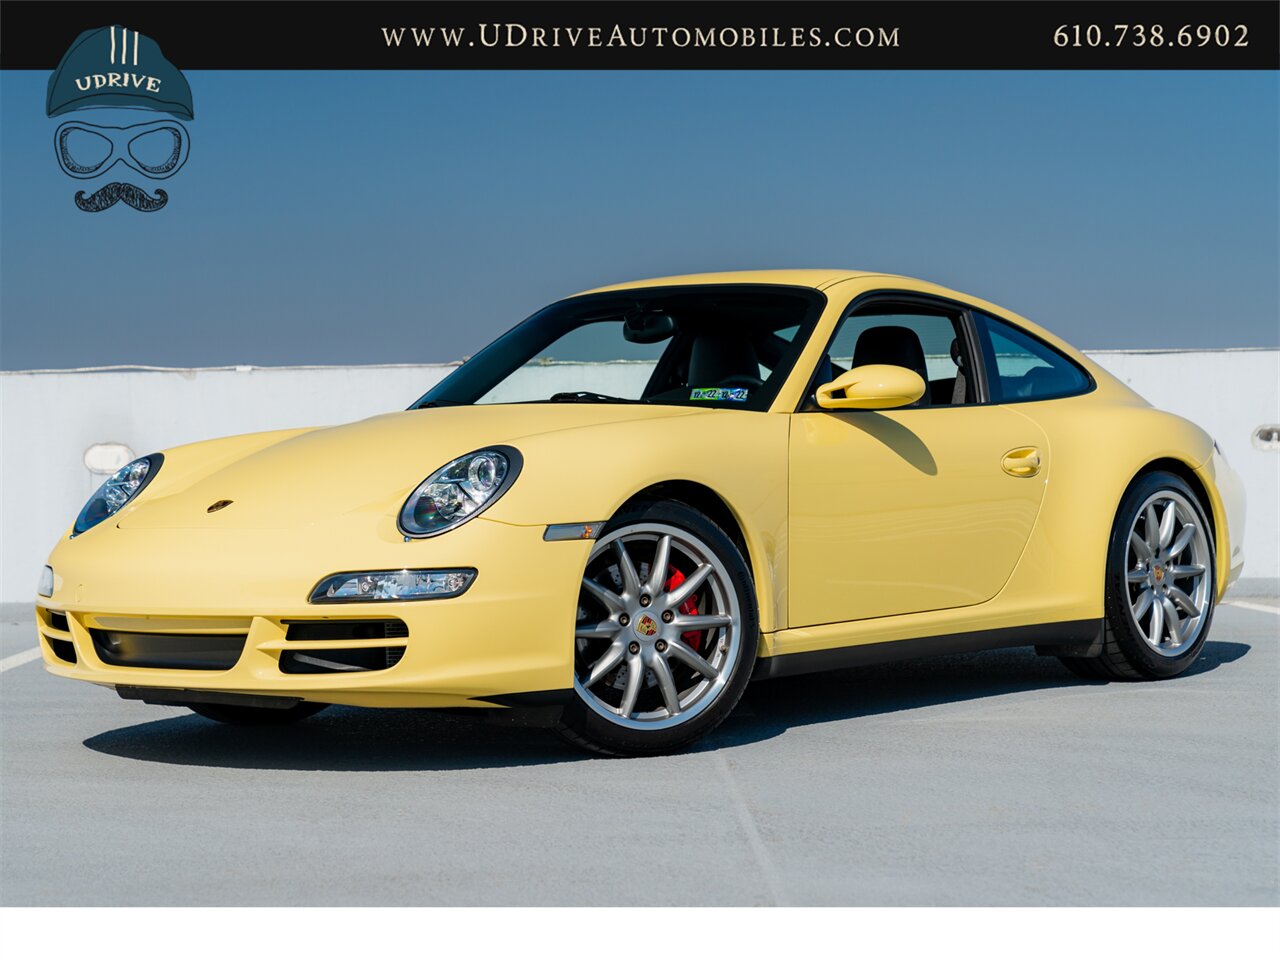 2007 Porsche 911 Carrera 4S 997 C4S Paint To Sample Pastel Yellow  6 Speed Sport Chrono Full Leather Yellow Gauges - Photo 1 - West Chester, PA 19382